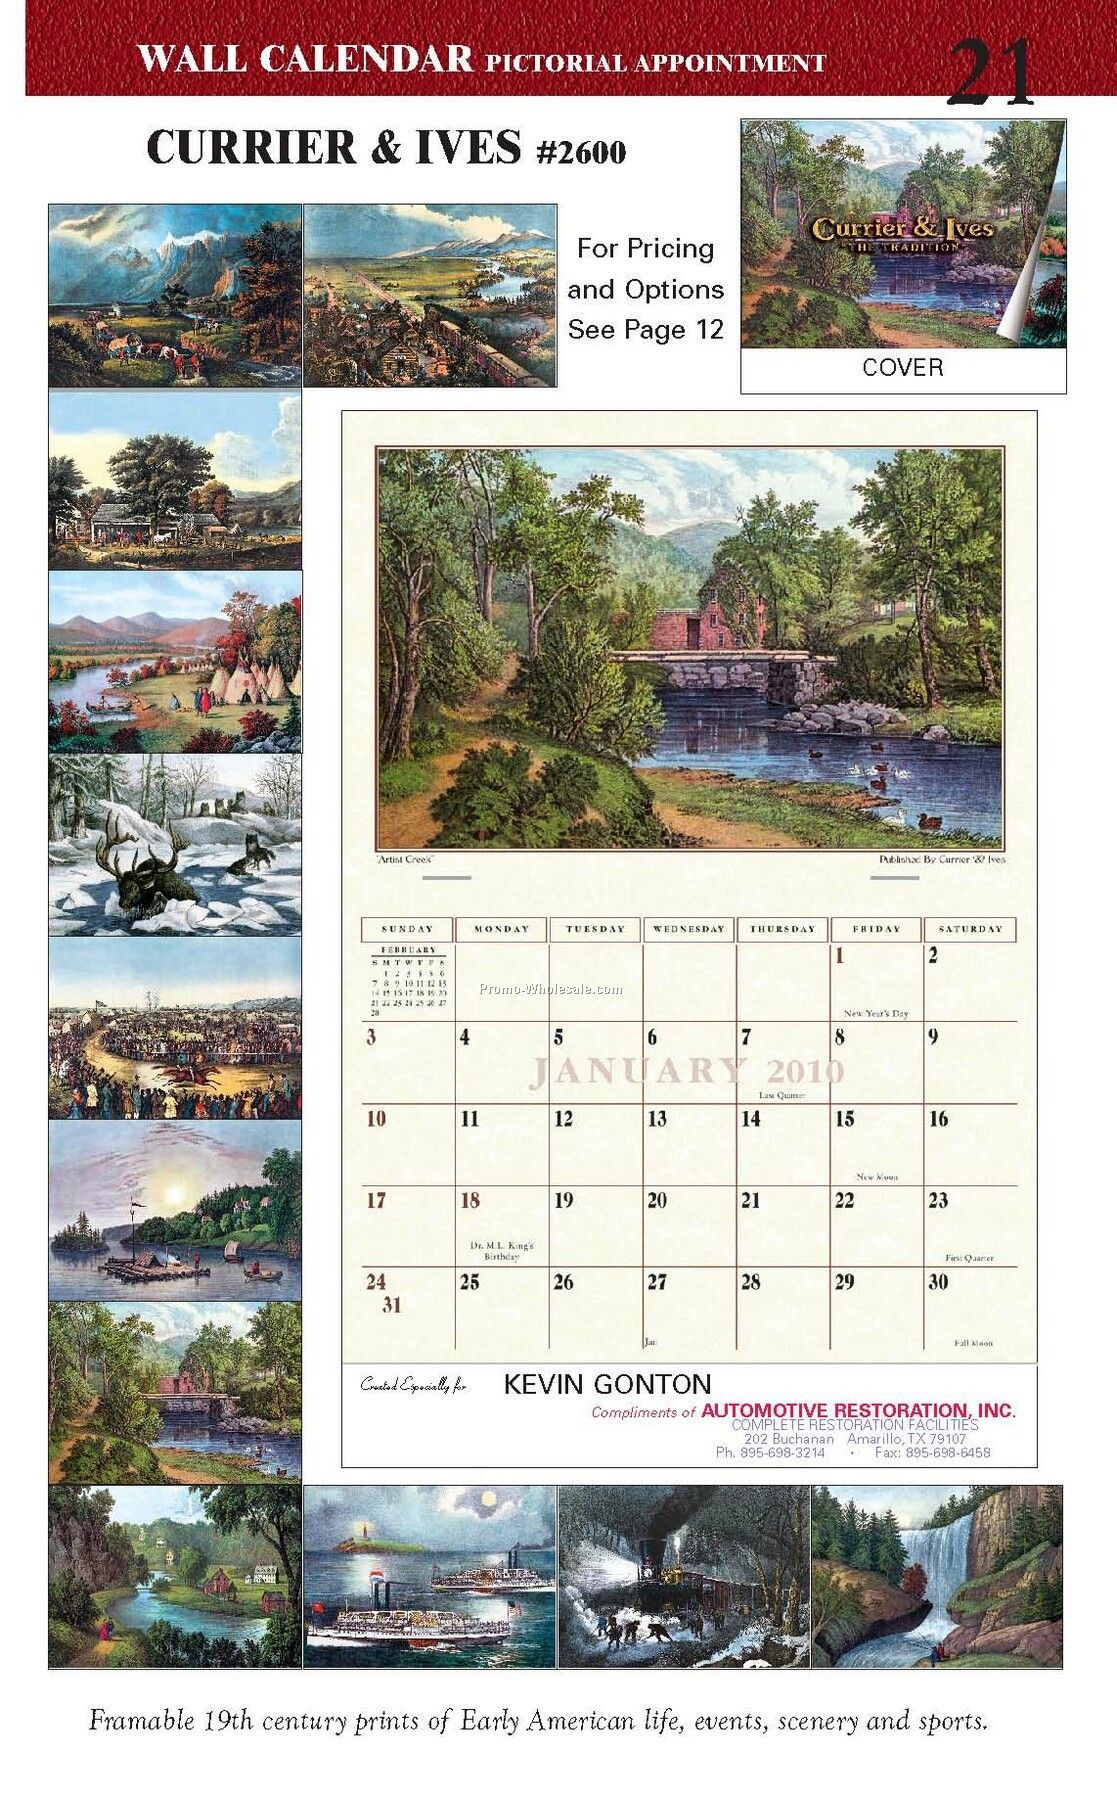 10-5/8"x9-1/2" Currier & Ives Pictorial Wall Calendar - Saddle Stitched